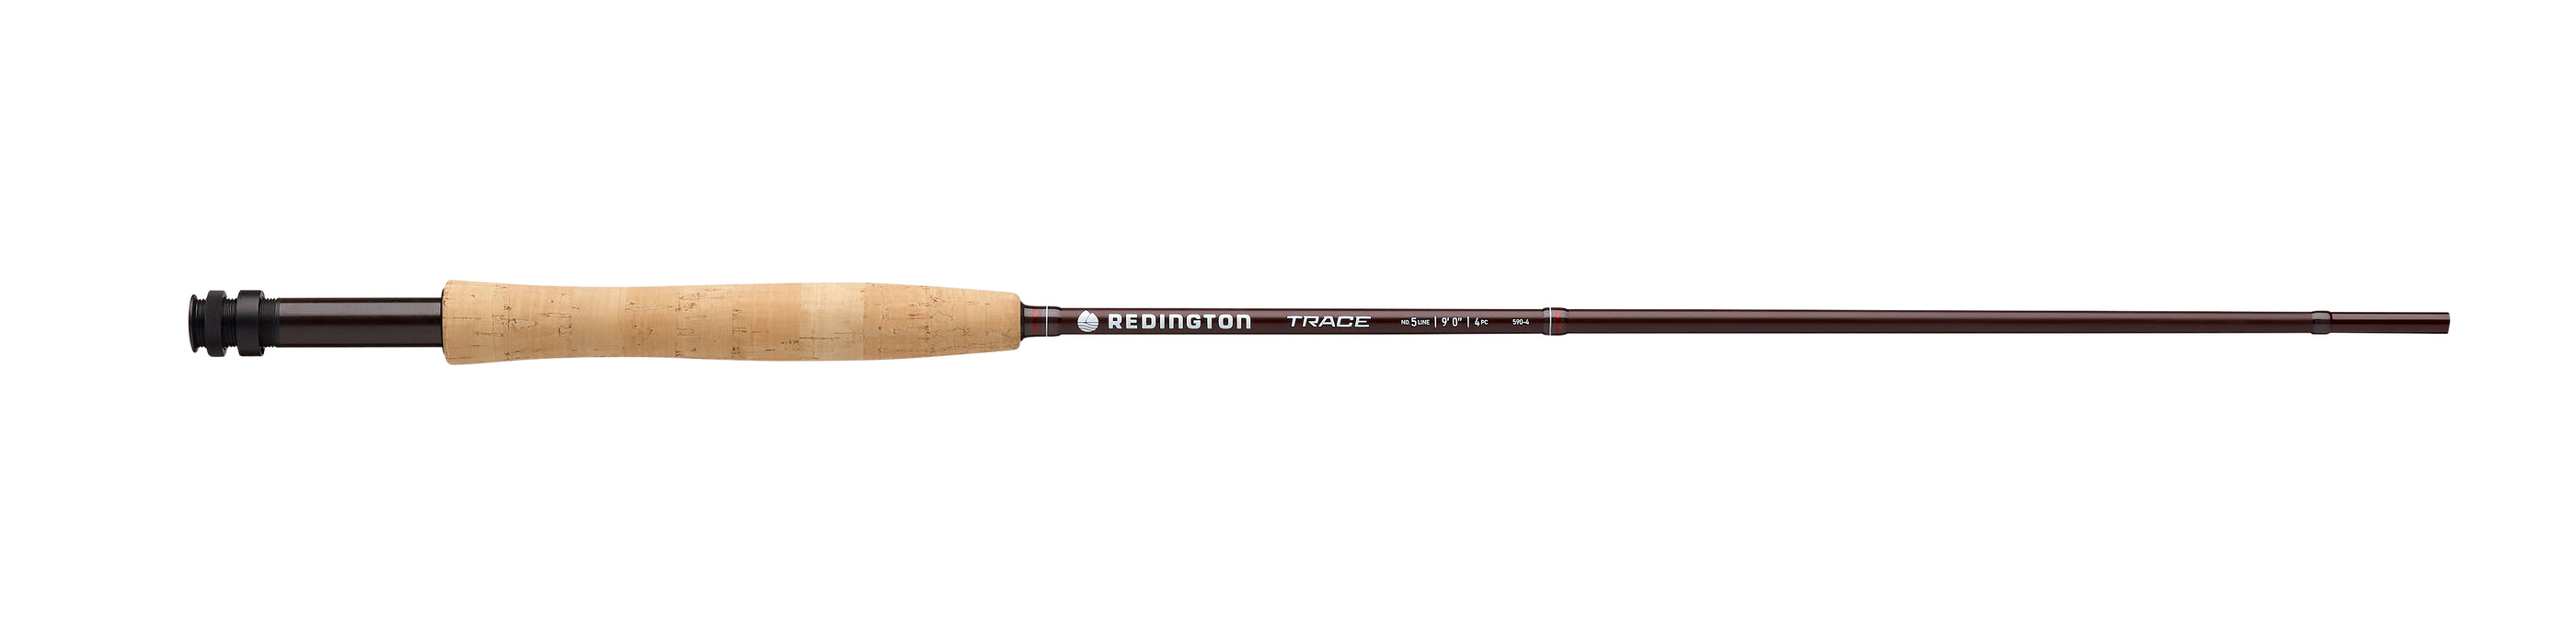 Redington Trace Fly Rod Review - Trident Fly Fishing